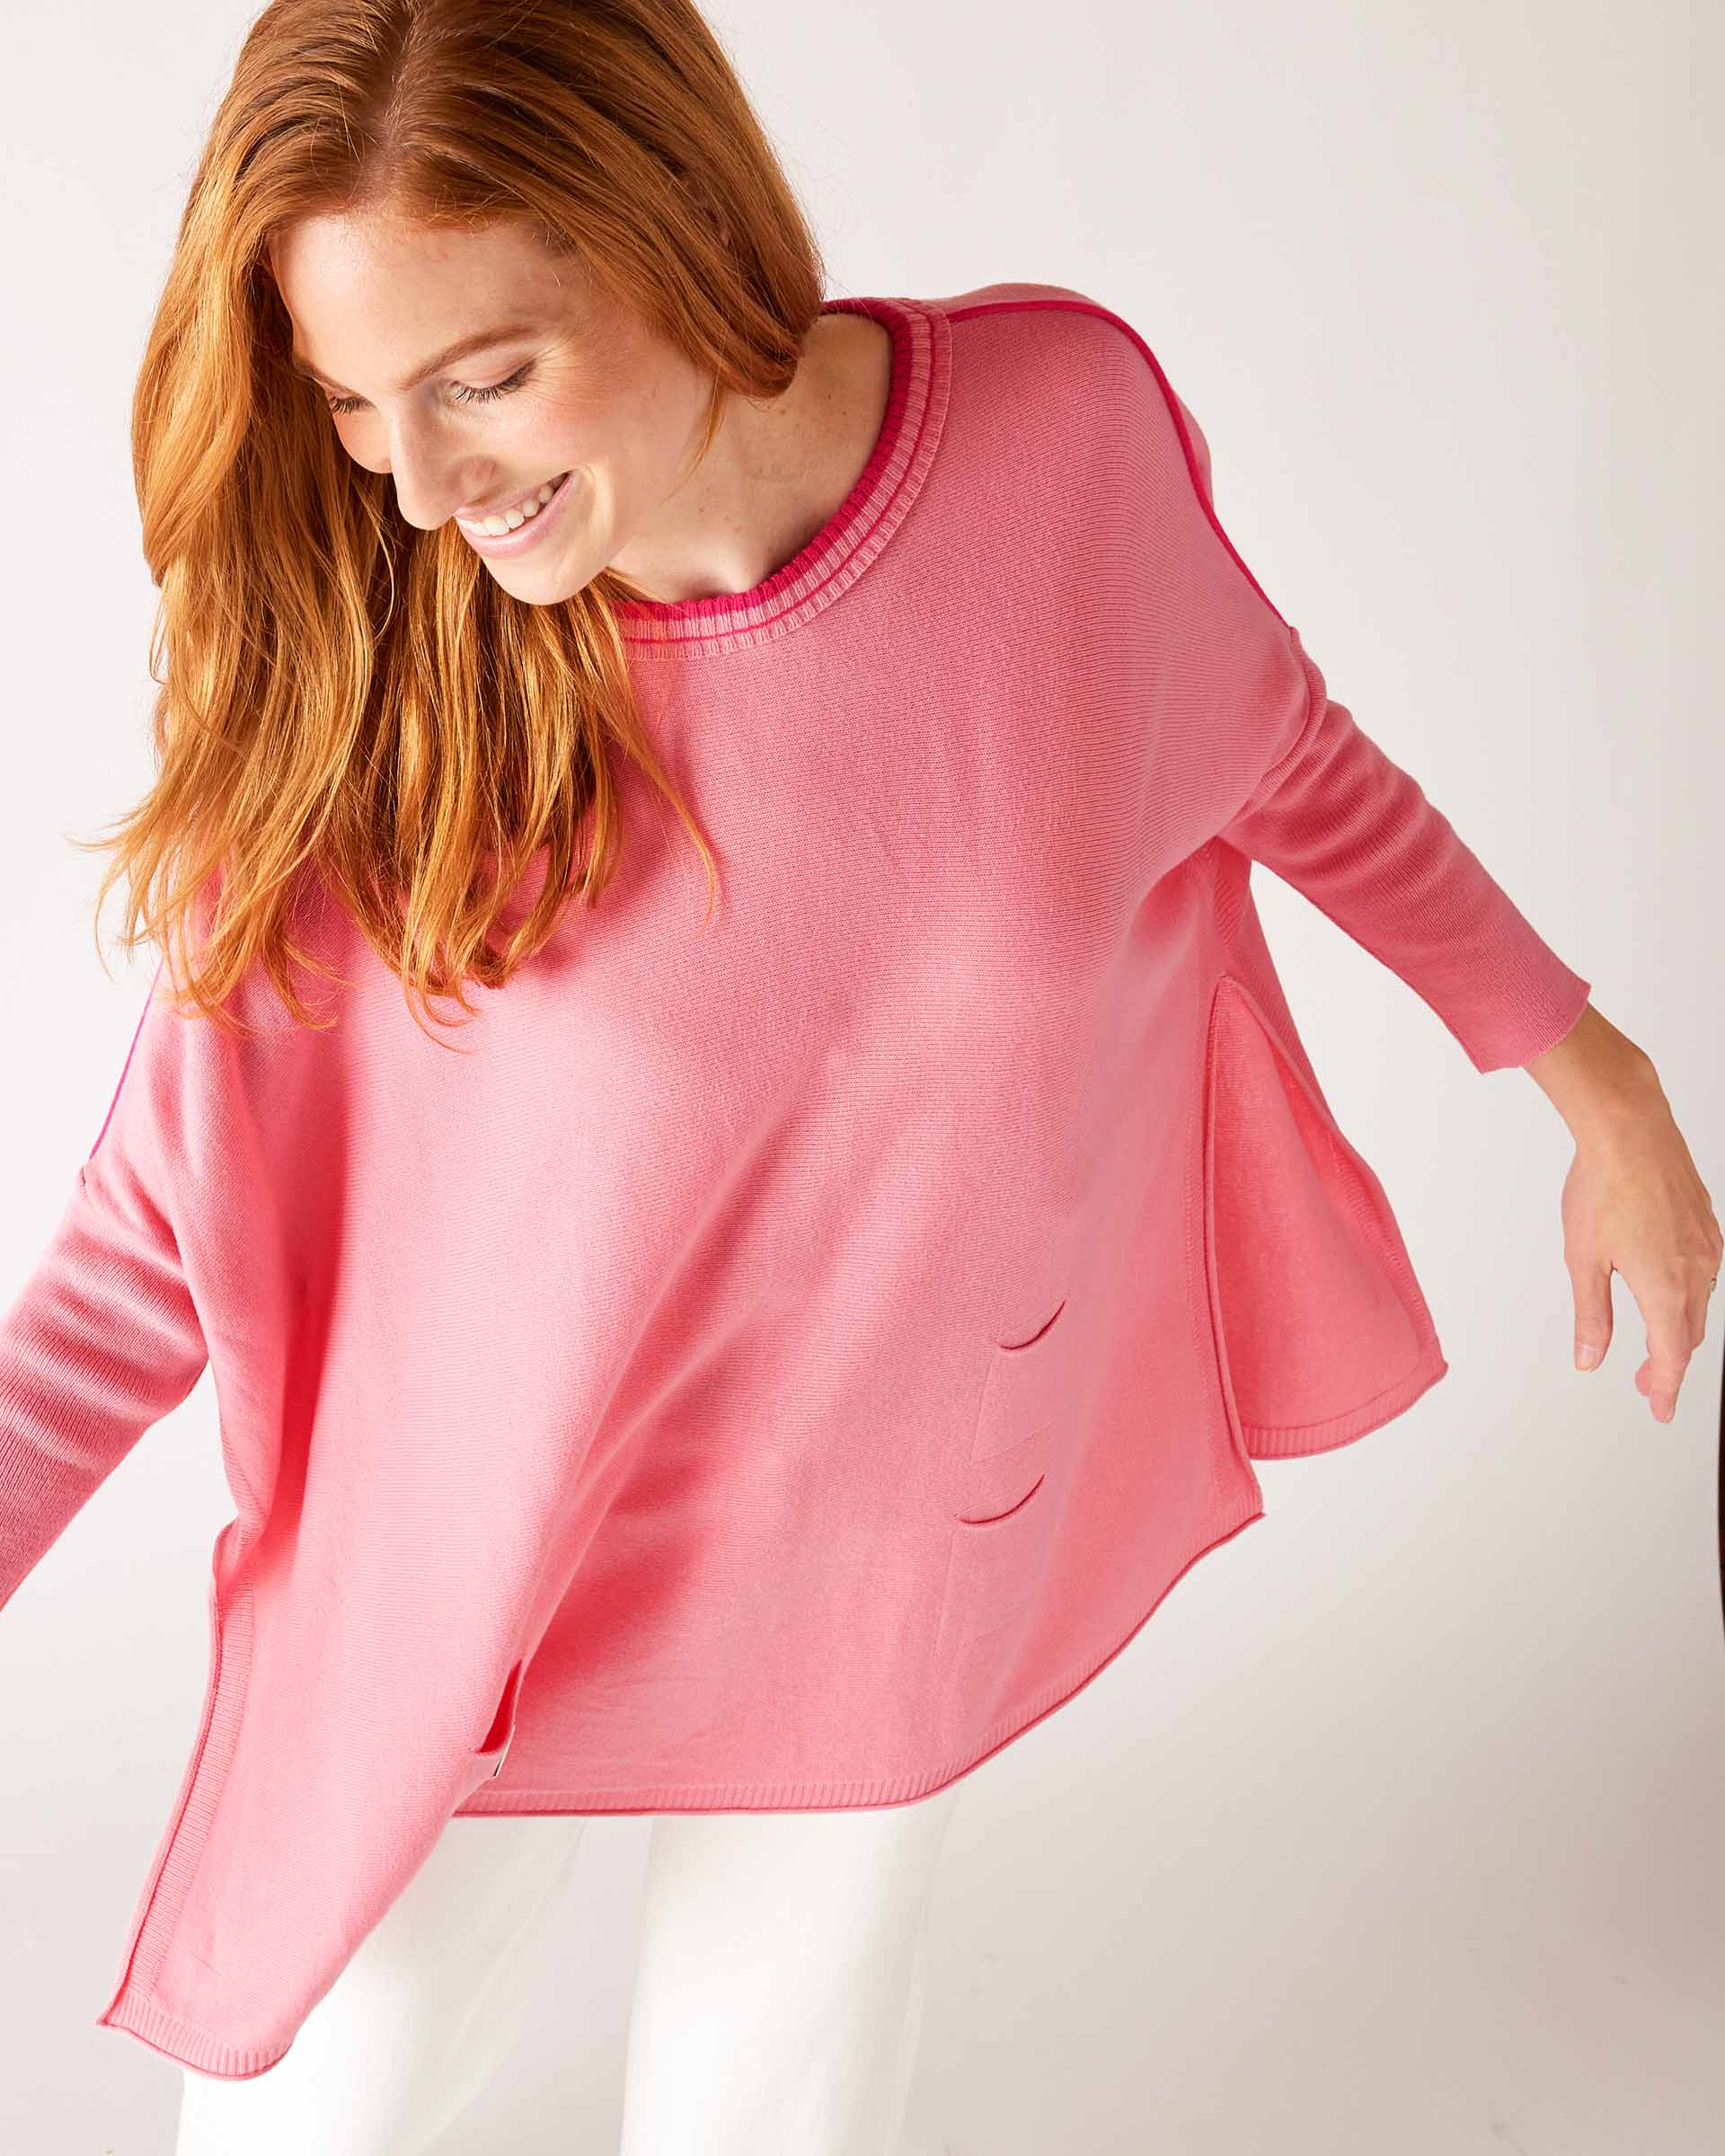  Women's Oversized Crewneck Knit Sweater in Pink Contrast Shoulder Contrast View